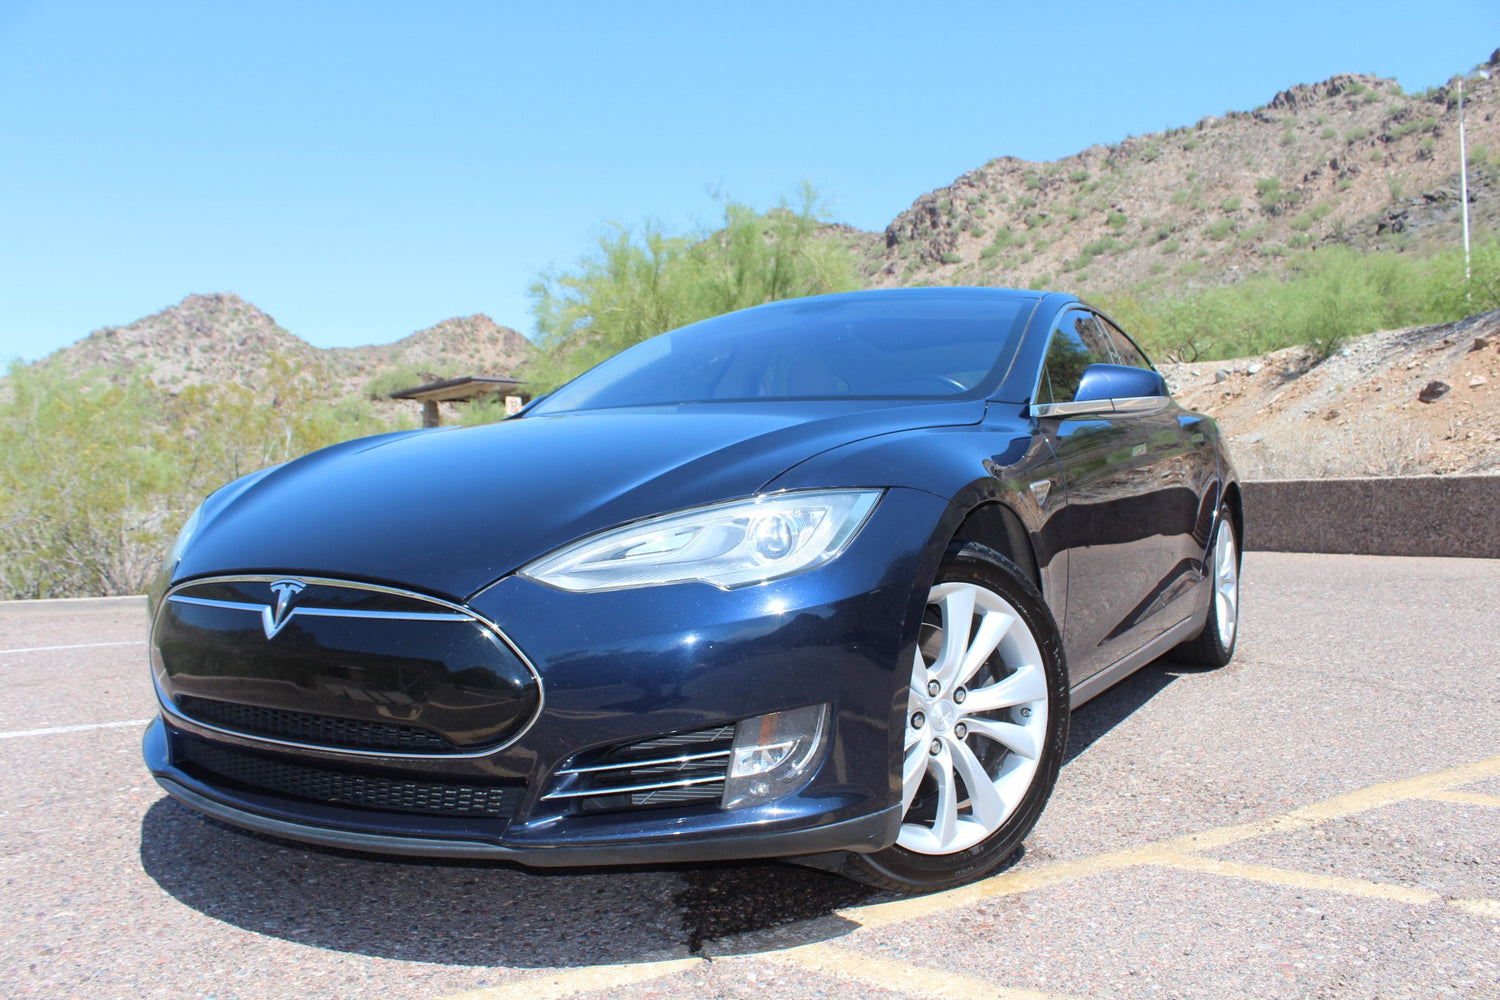 Tesla Model S Cost of Ownership Report After 250,000+ Miles